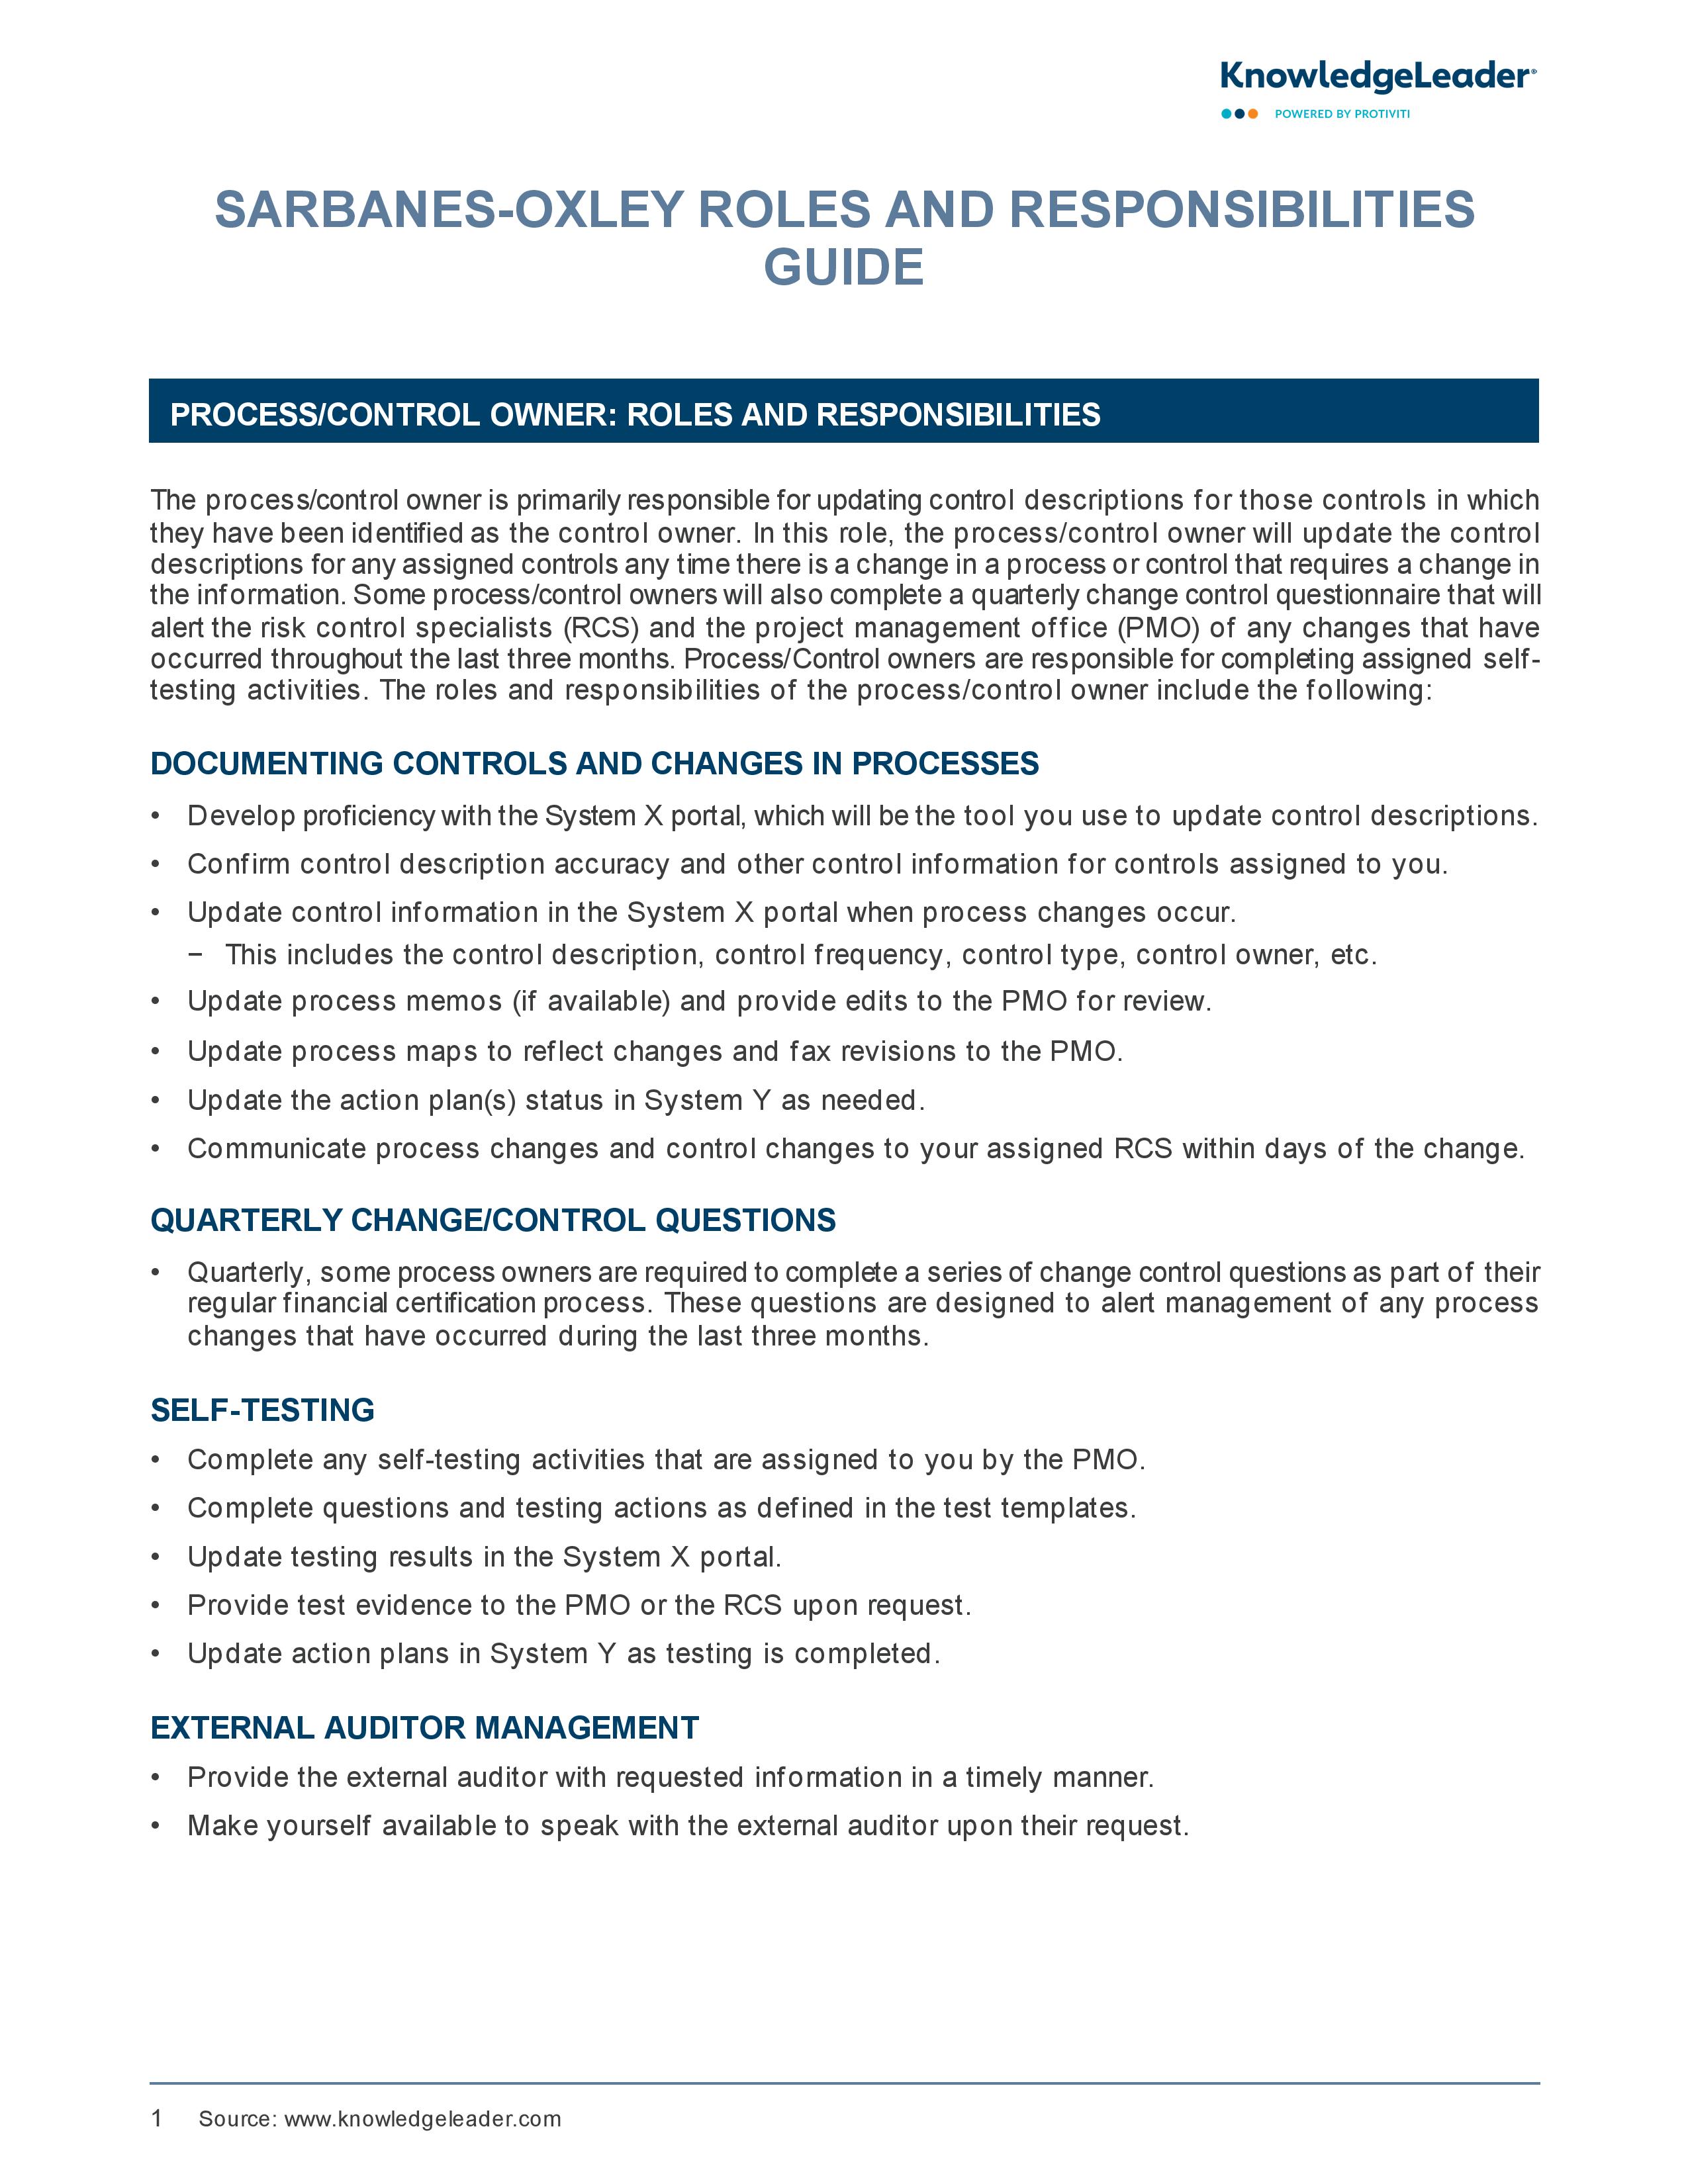 screenshot of the first page of Sarbanes-Oxley Roles and Responsibilities Guide